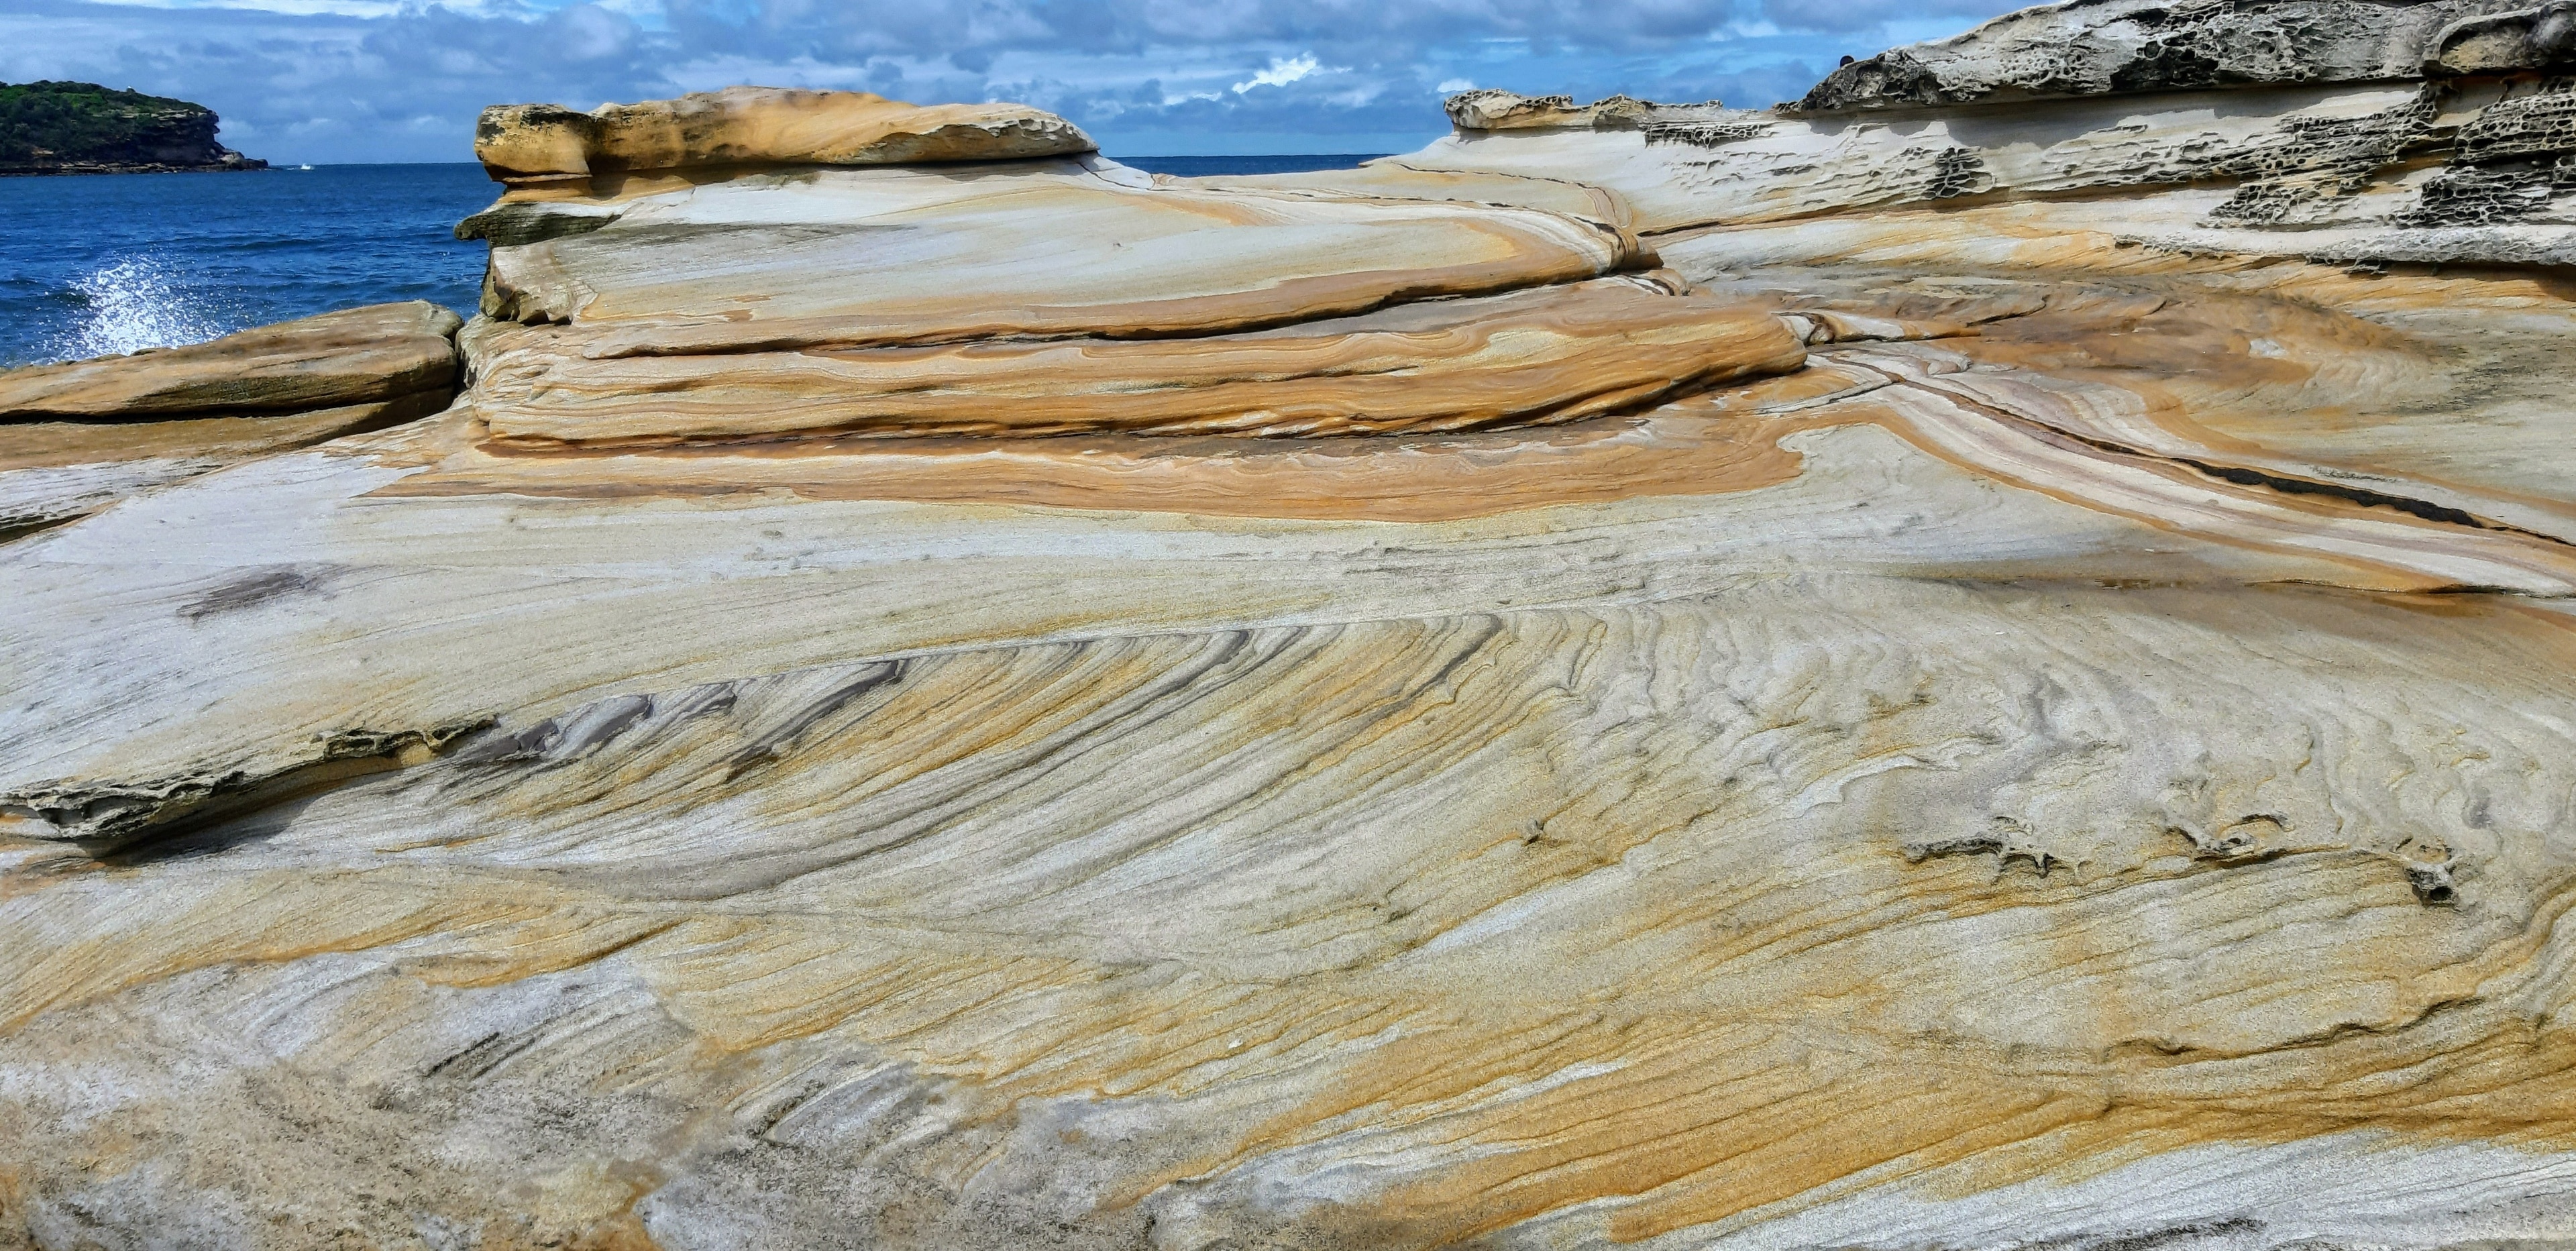 The sandstone in this area is amazing. Most of Sydney's base is sandstone and clay. The colours that come out are stunning. This area is also where James Cook set up for a British Colony  in 1770 in Botany Bay (Same area as this photo). Only a short bus ride or drive from the city center of Sydney. #nature